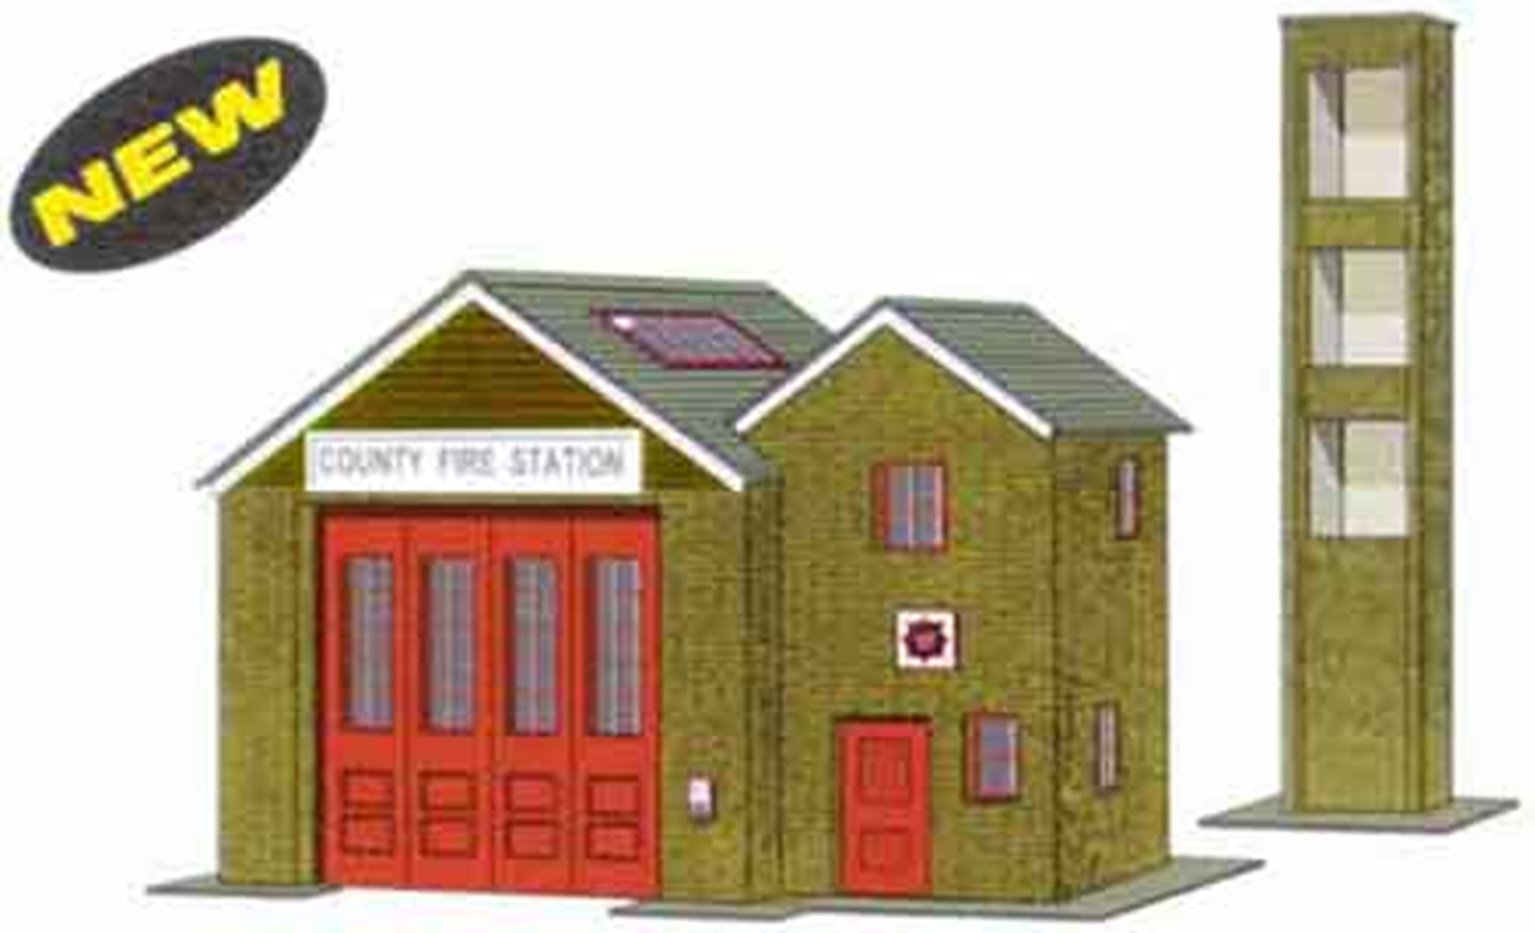 SQB36 SUPERQUICK  Country Fire Station Card Kit